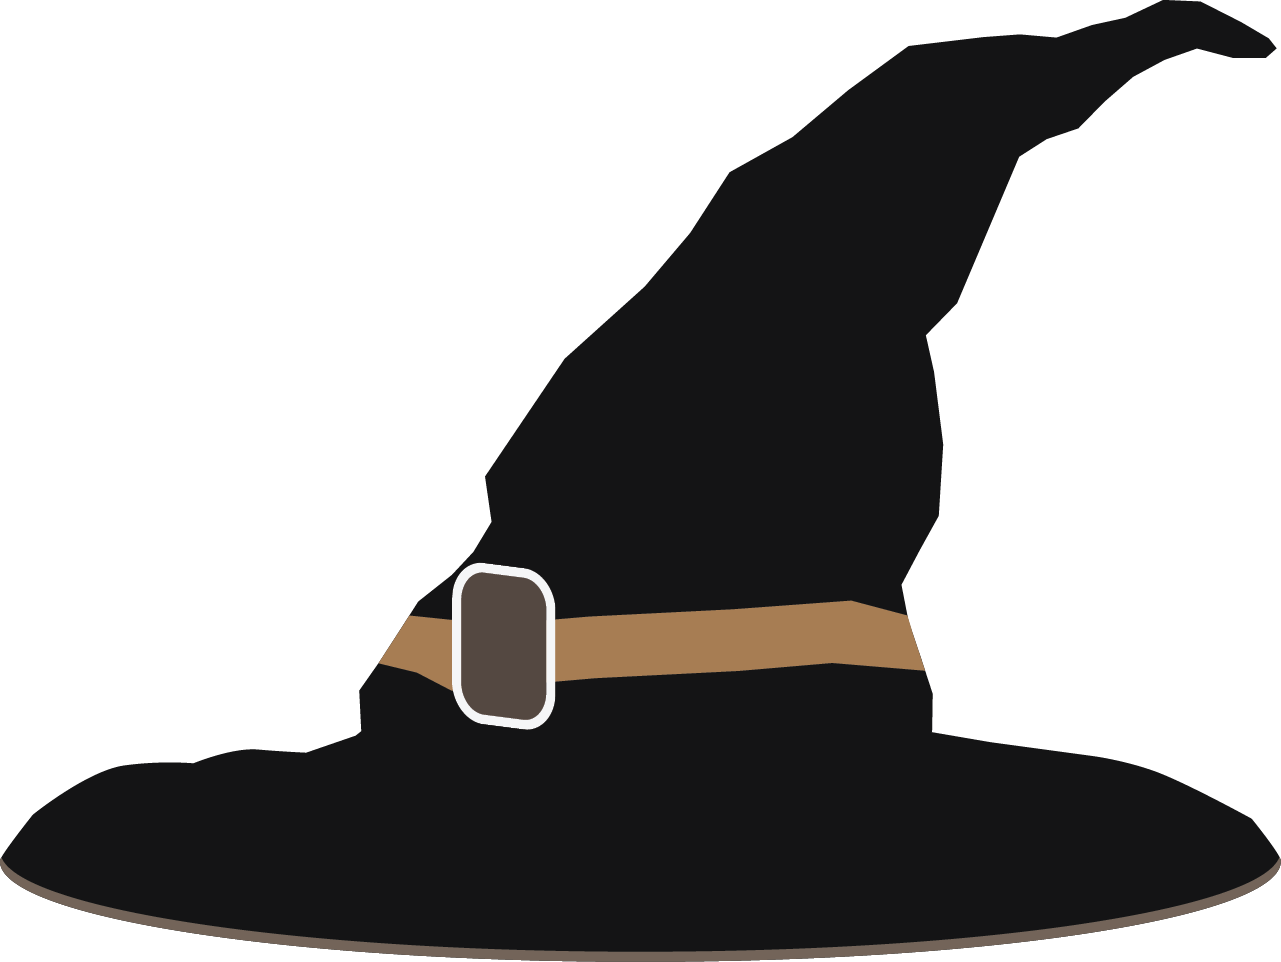 Clip Arts Related To : transparent witch hat png. 